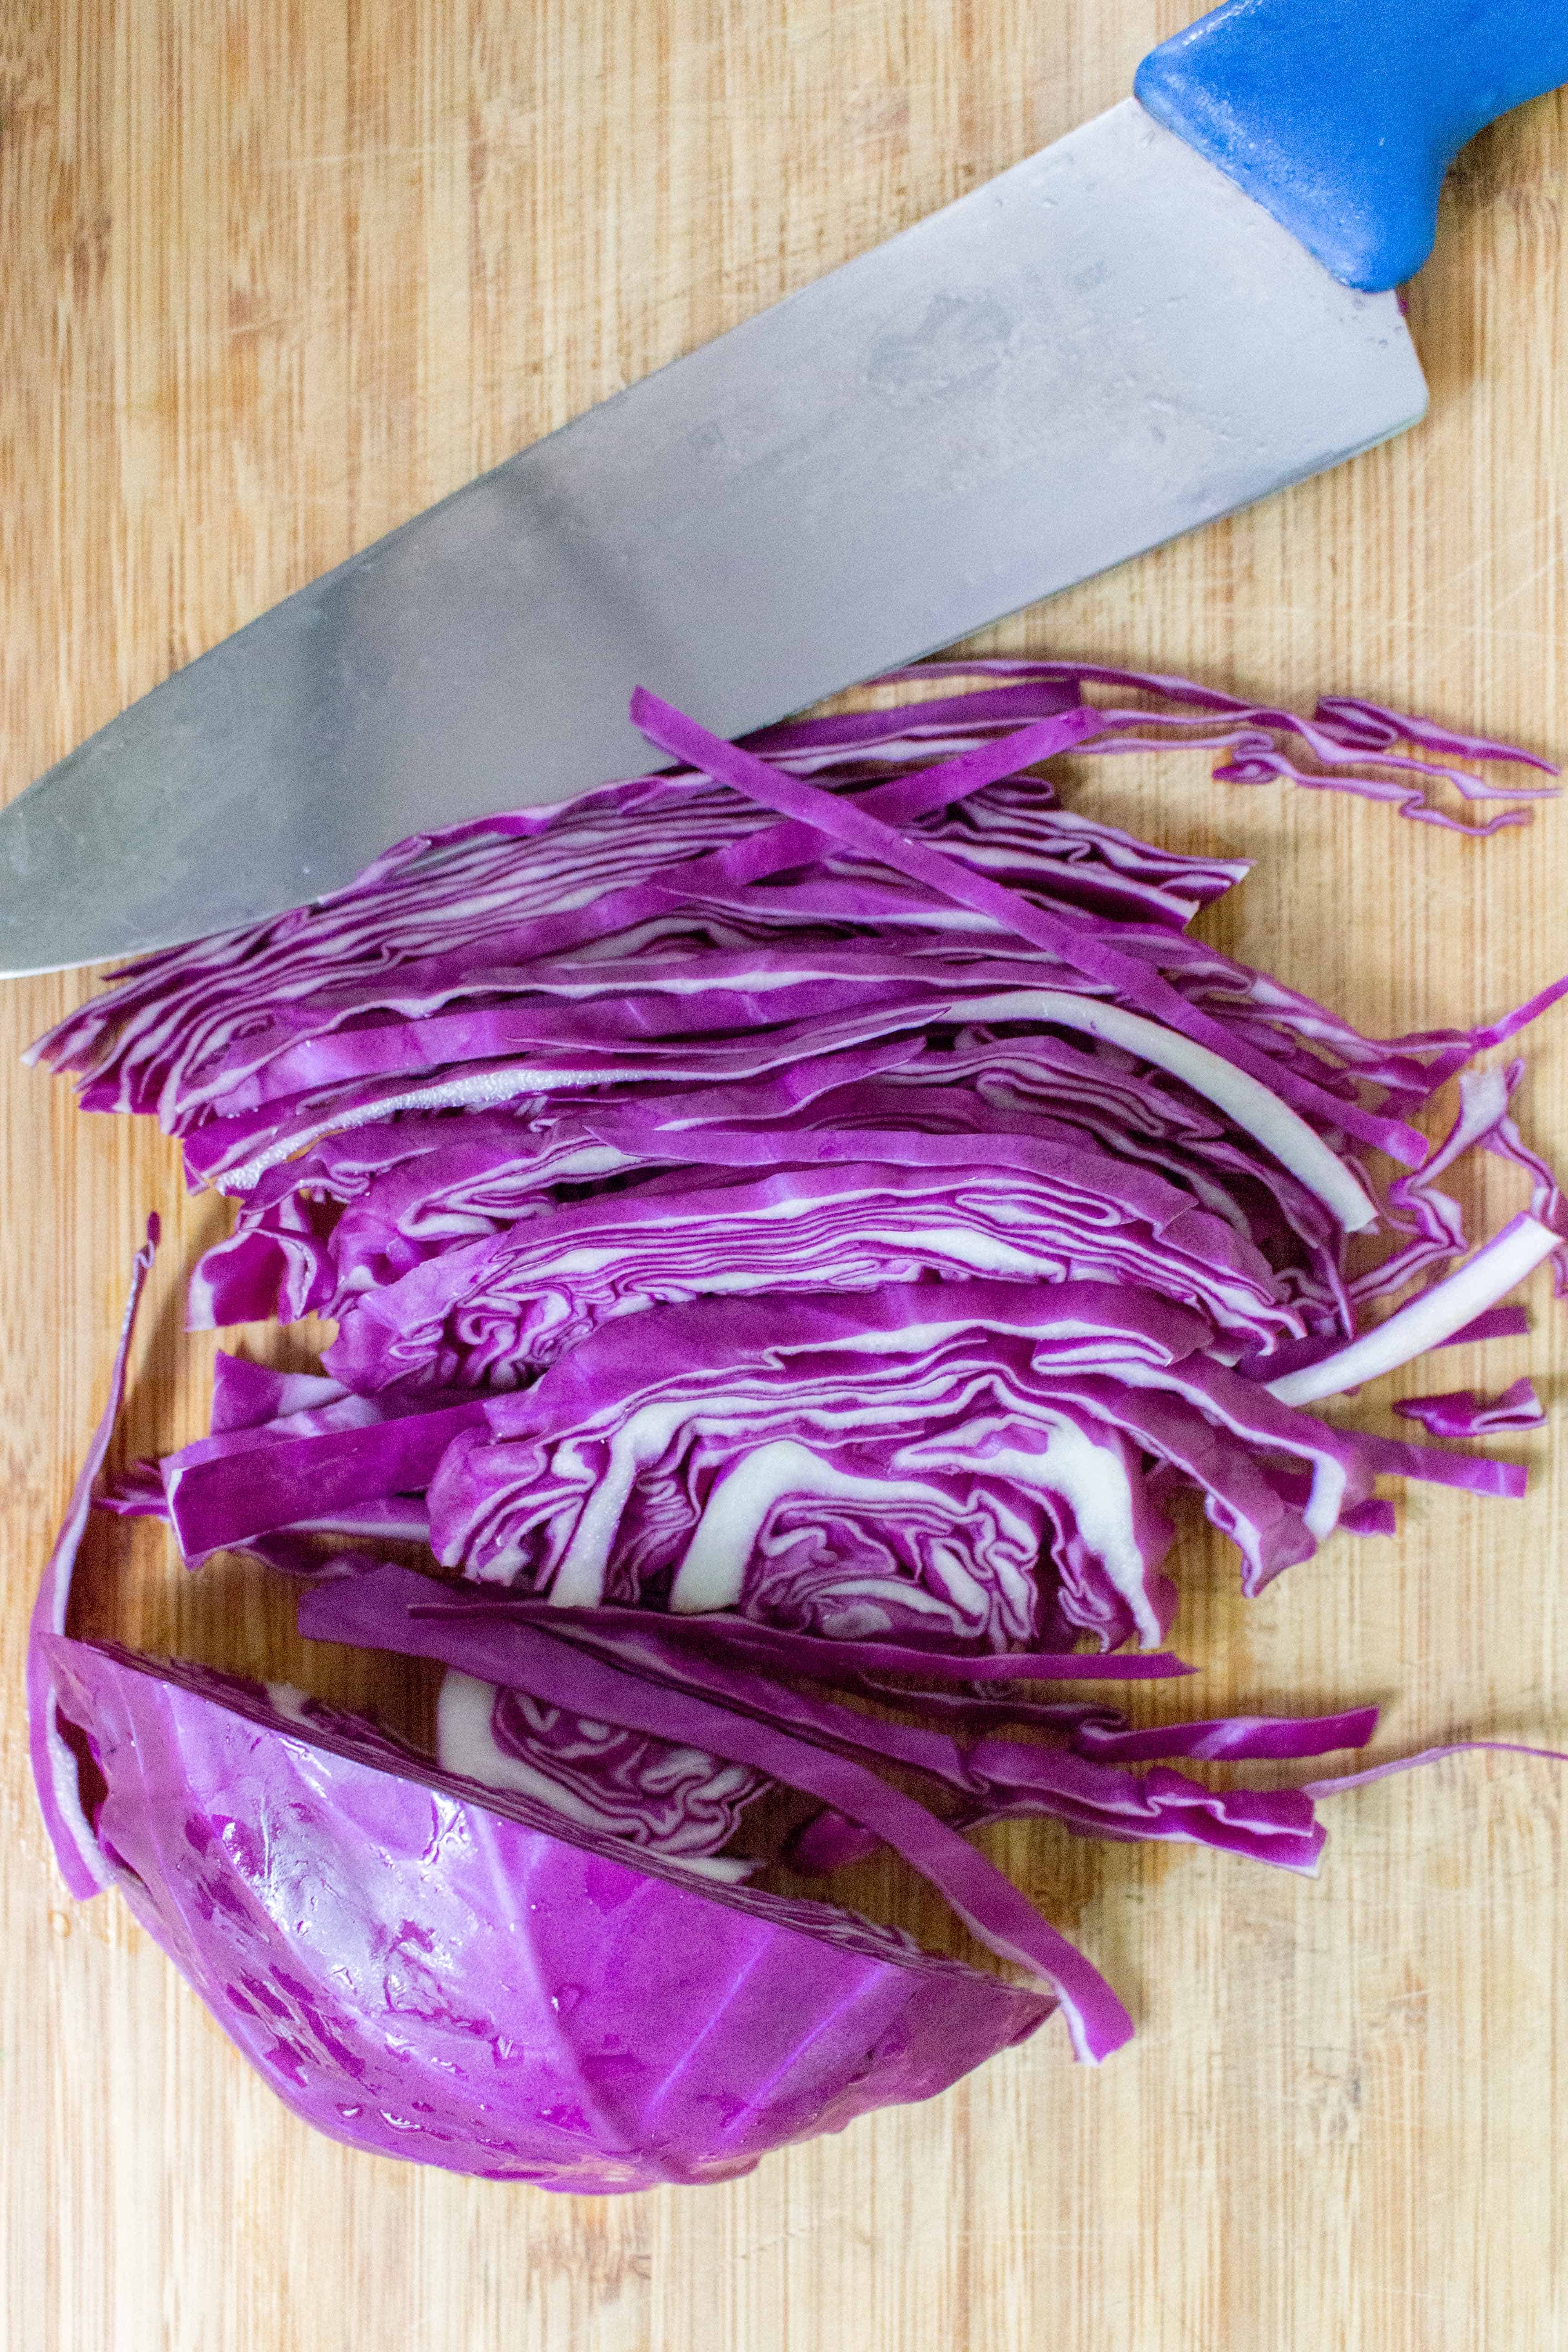 Need some pickled cabbage quickly? Here's an easy Quick Pickled Cabbage recipe!